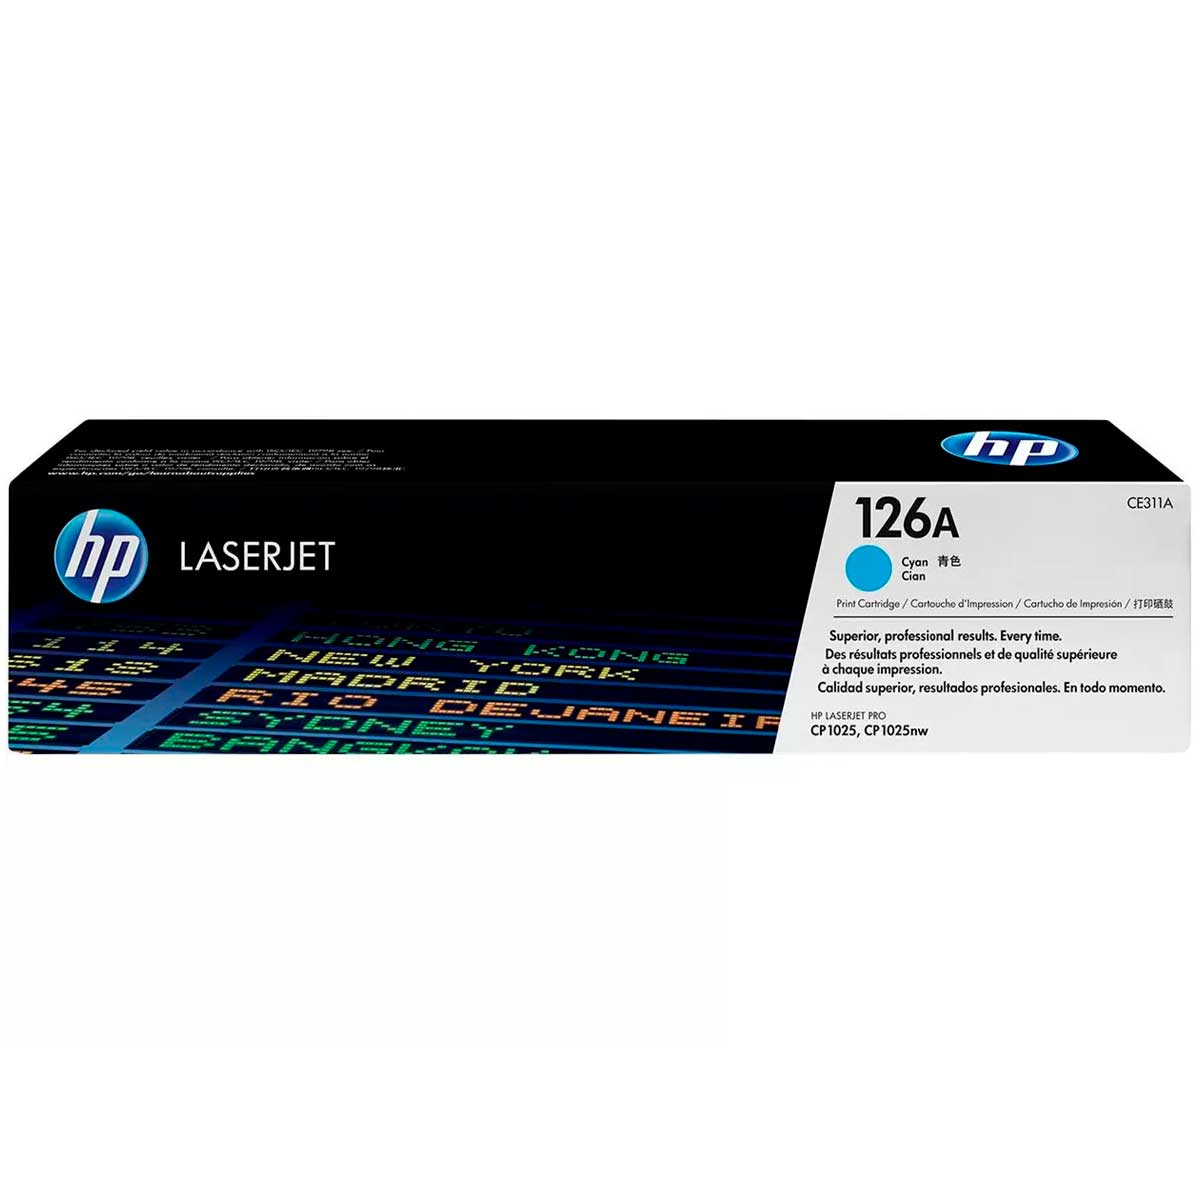 Toner HP 126A Ciano - CE311A - Para HP Color Laserjet M175NW / M175A / M176N / M275NW / M177FW / CP1025